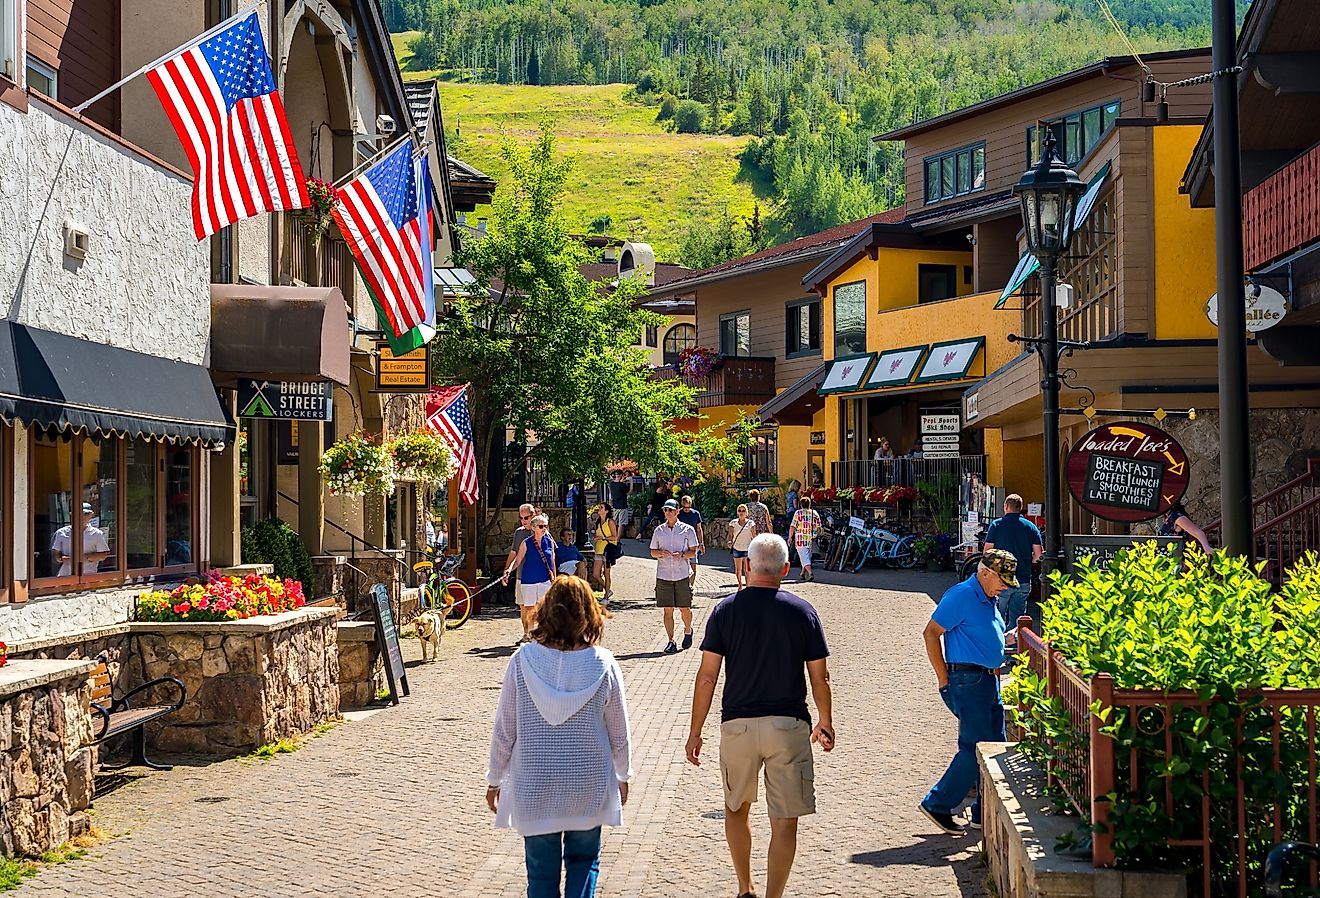 Downtown street in Vail, Colorado in the summer. Image credit Alex Cimbal via Shutterstock